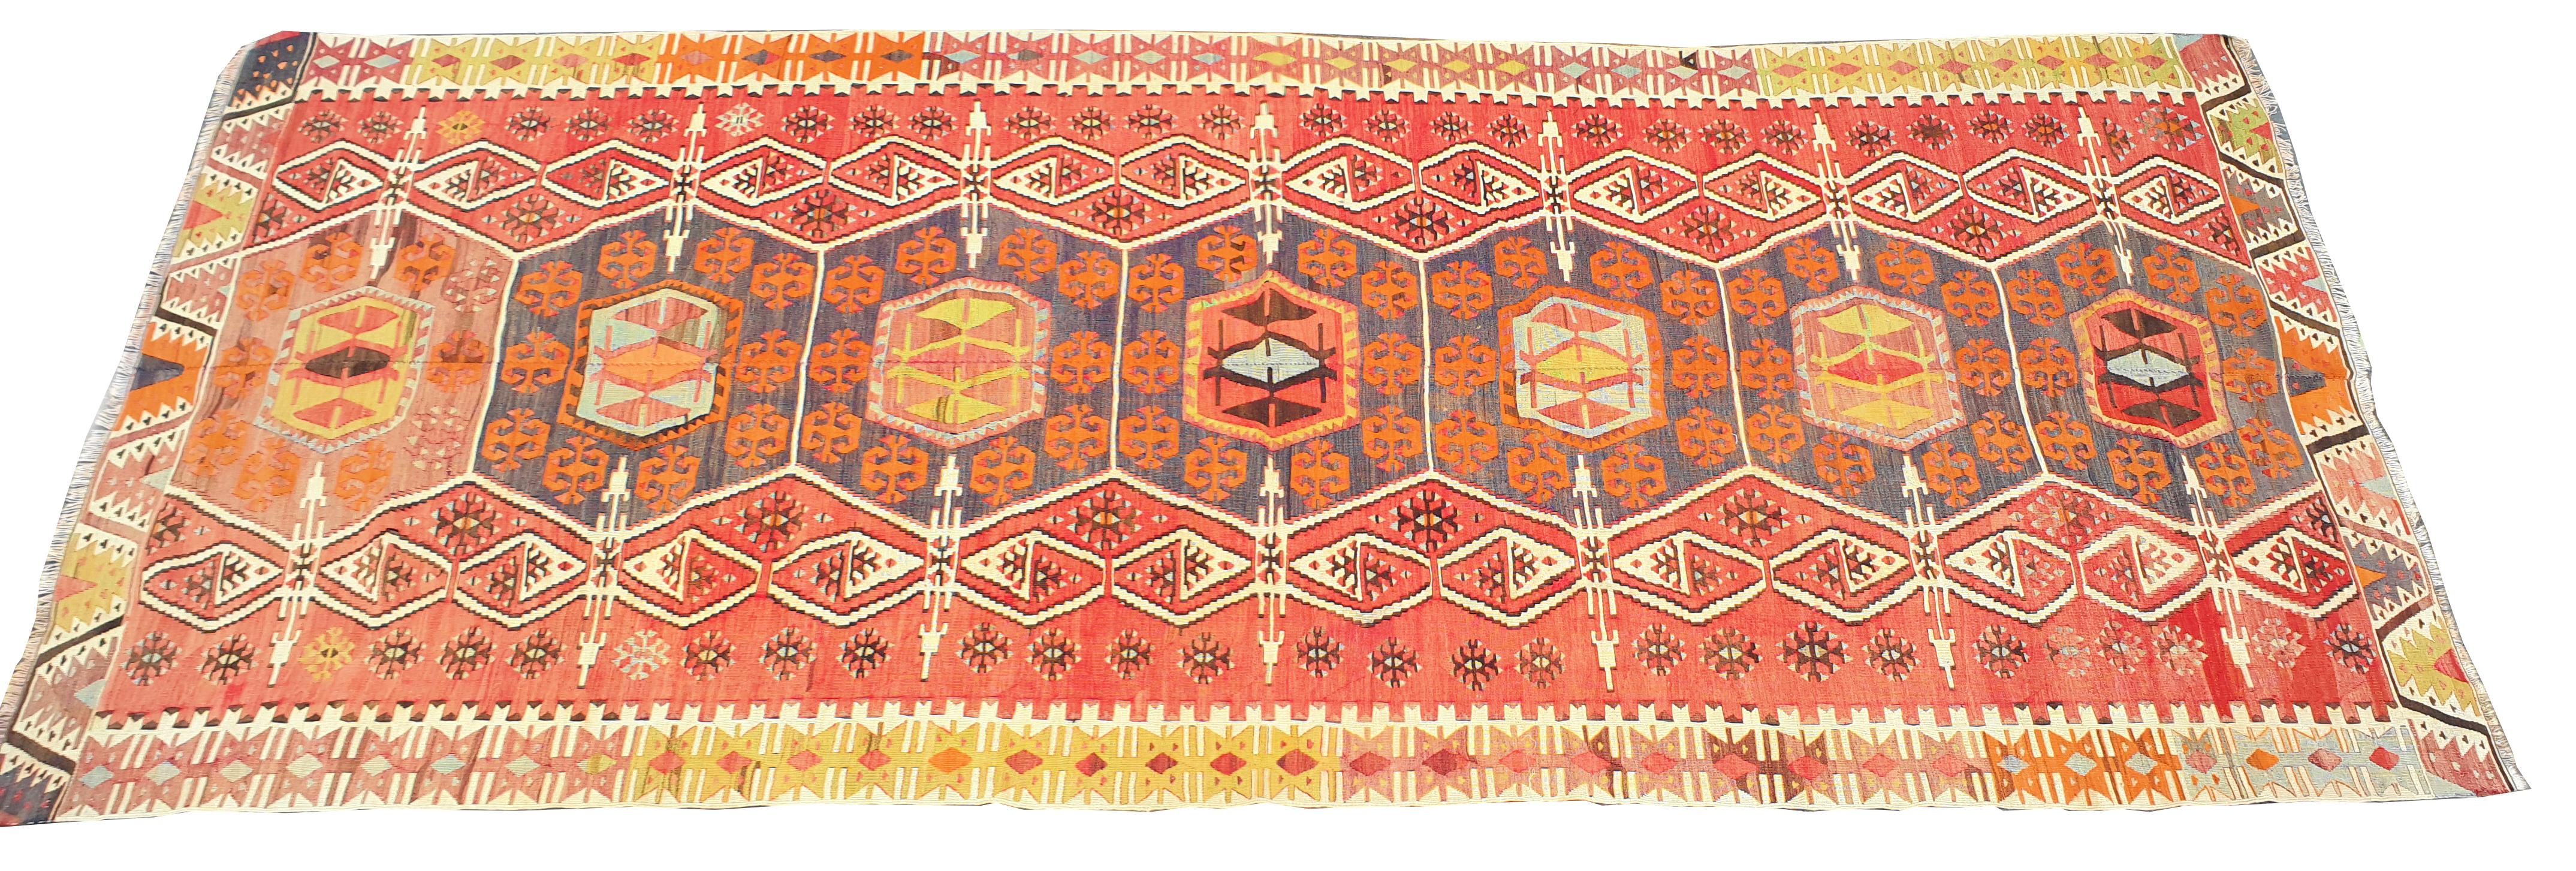 856 - 19th century Turkish kilim.
A very large and exceptional kilim with fresh colors and in very good condition